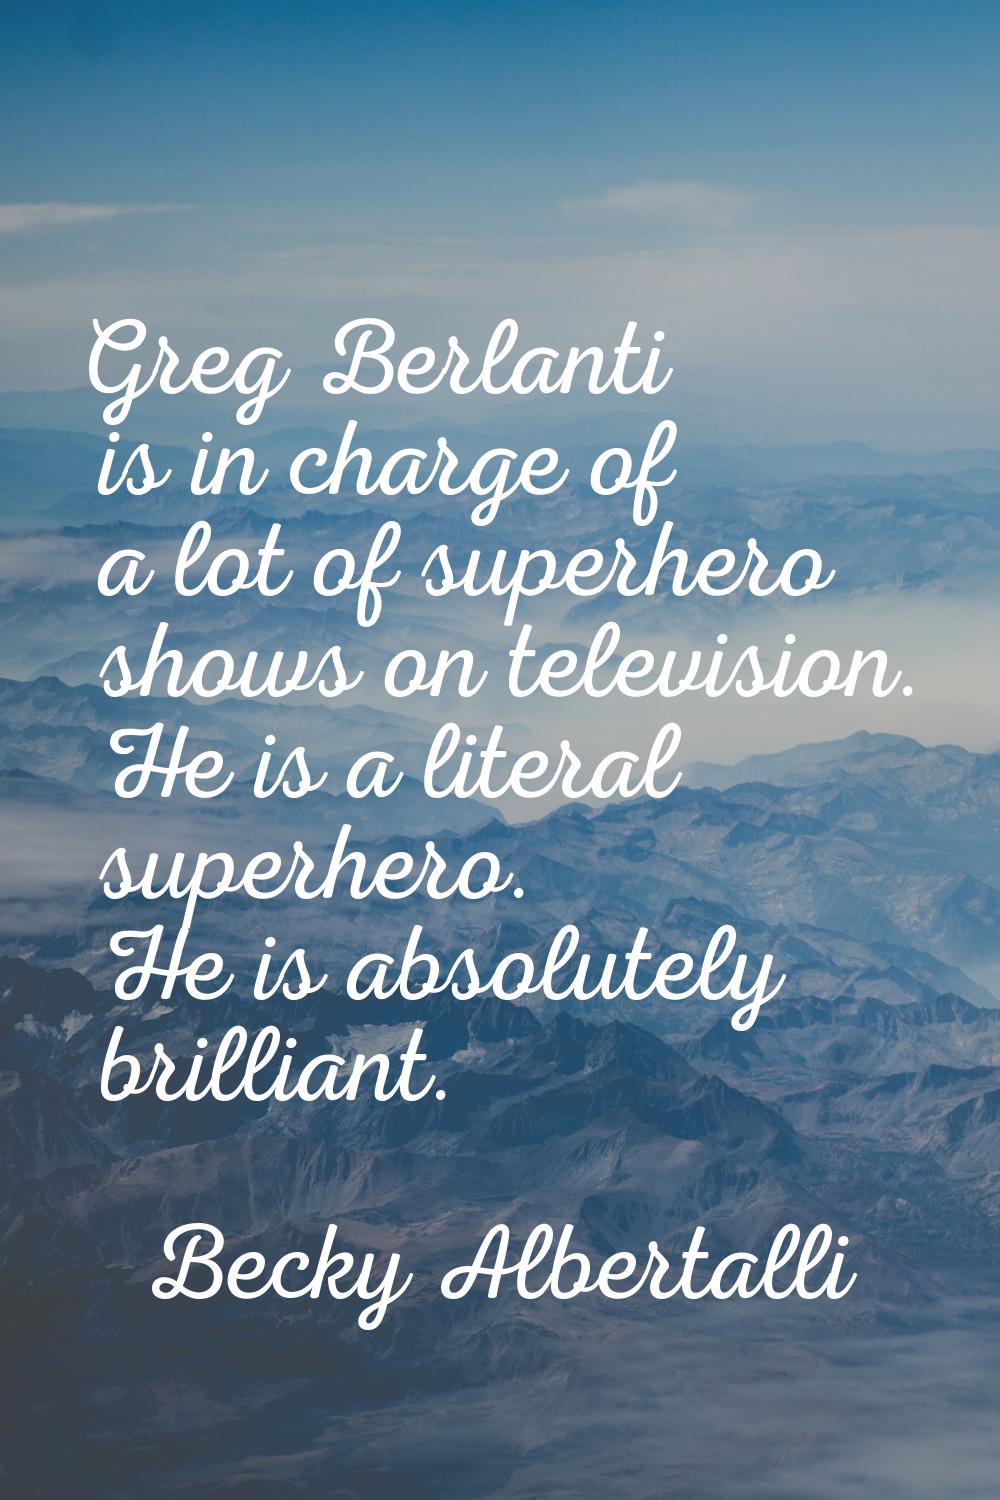 Greg Berlanti is in charge of a lot of superhero shows on television. He is a literal superhero. He